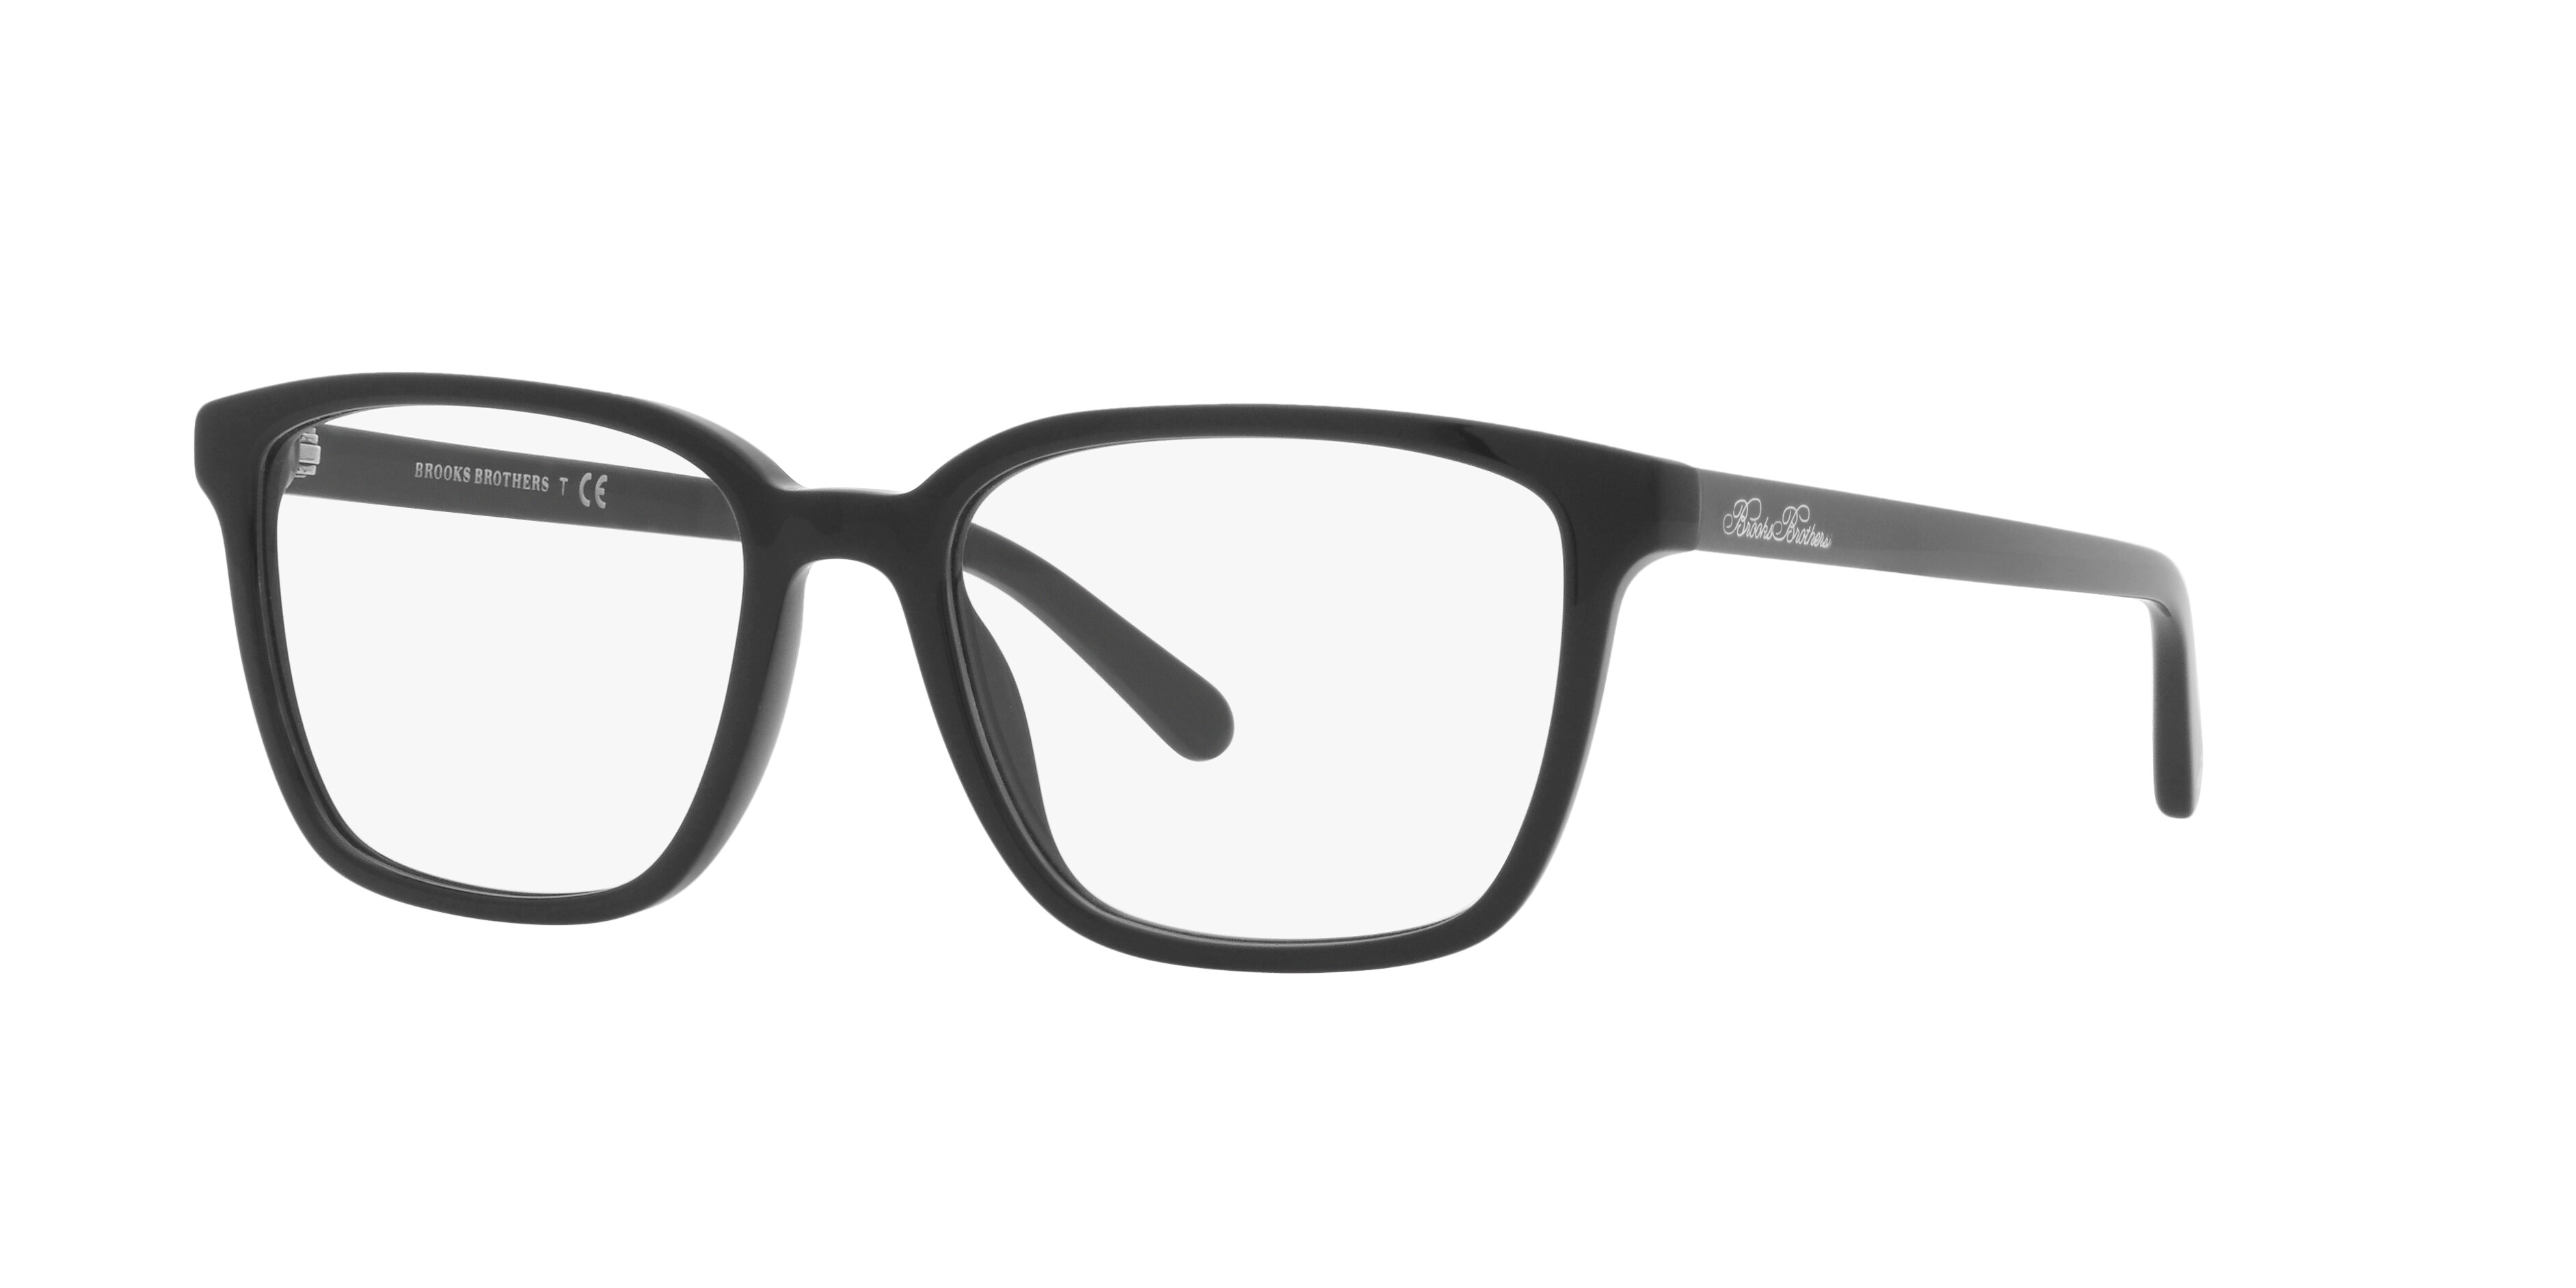 Angle_Left01 Brooks Brothers 0BB2052 6000 Brille Schwarz